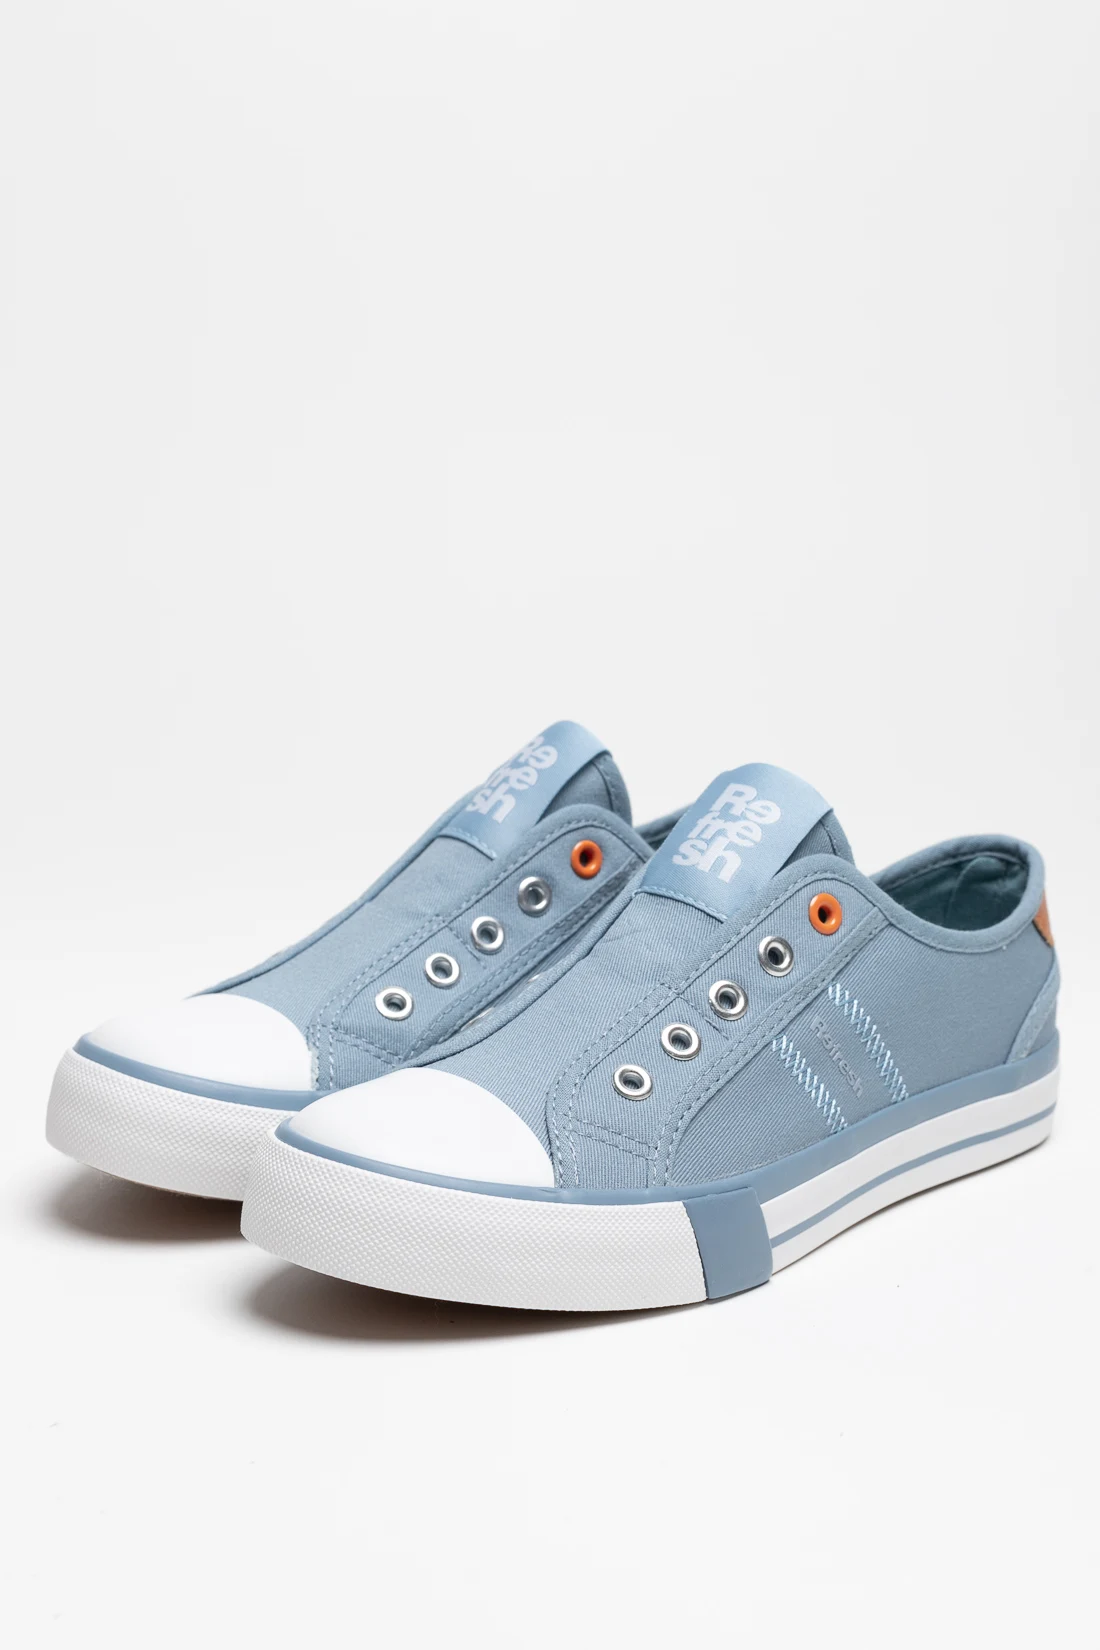 BAMBIAS REFRESH SNEAKERS - BLUE